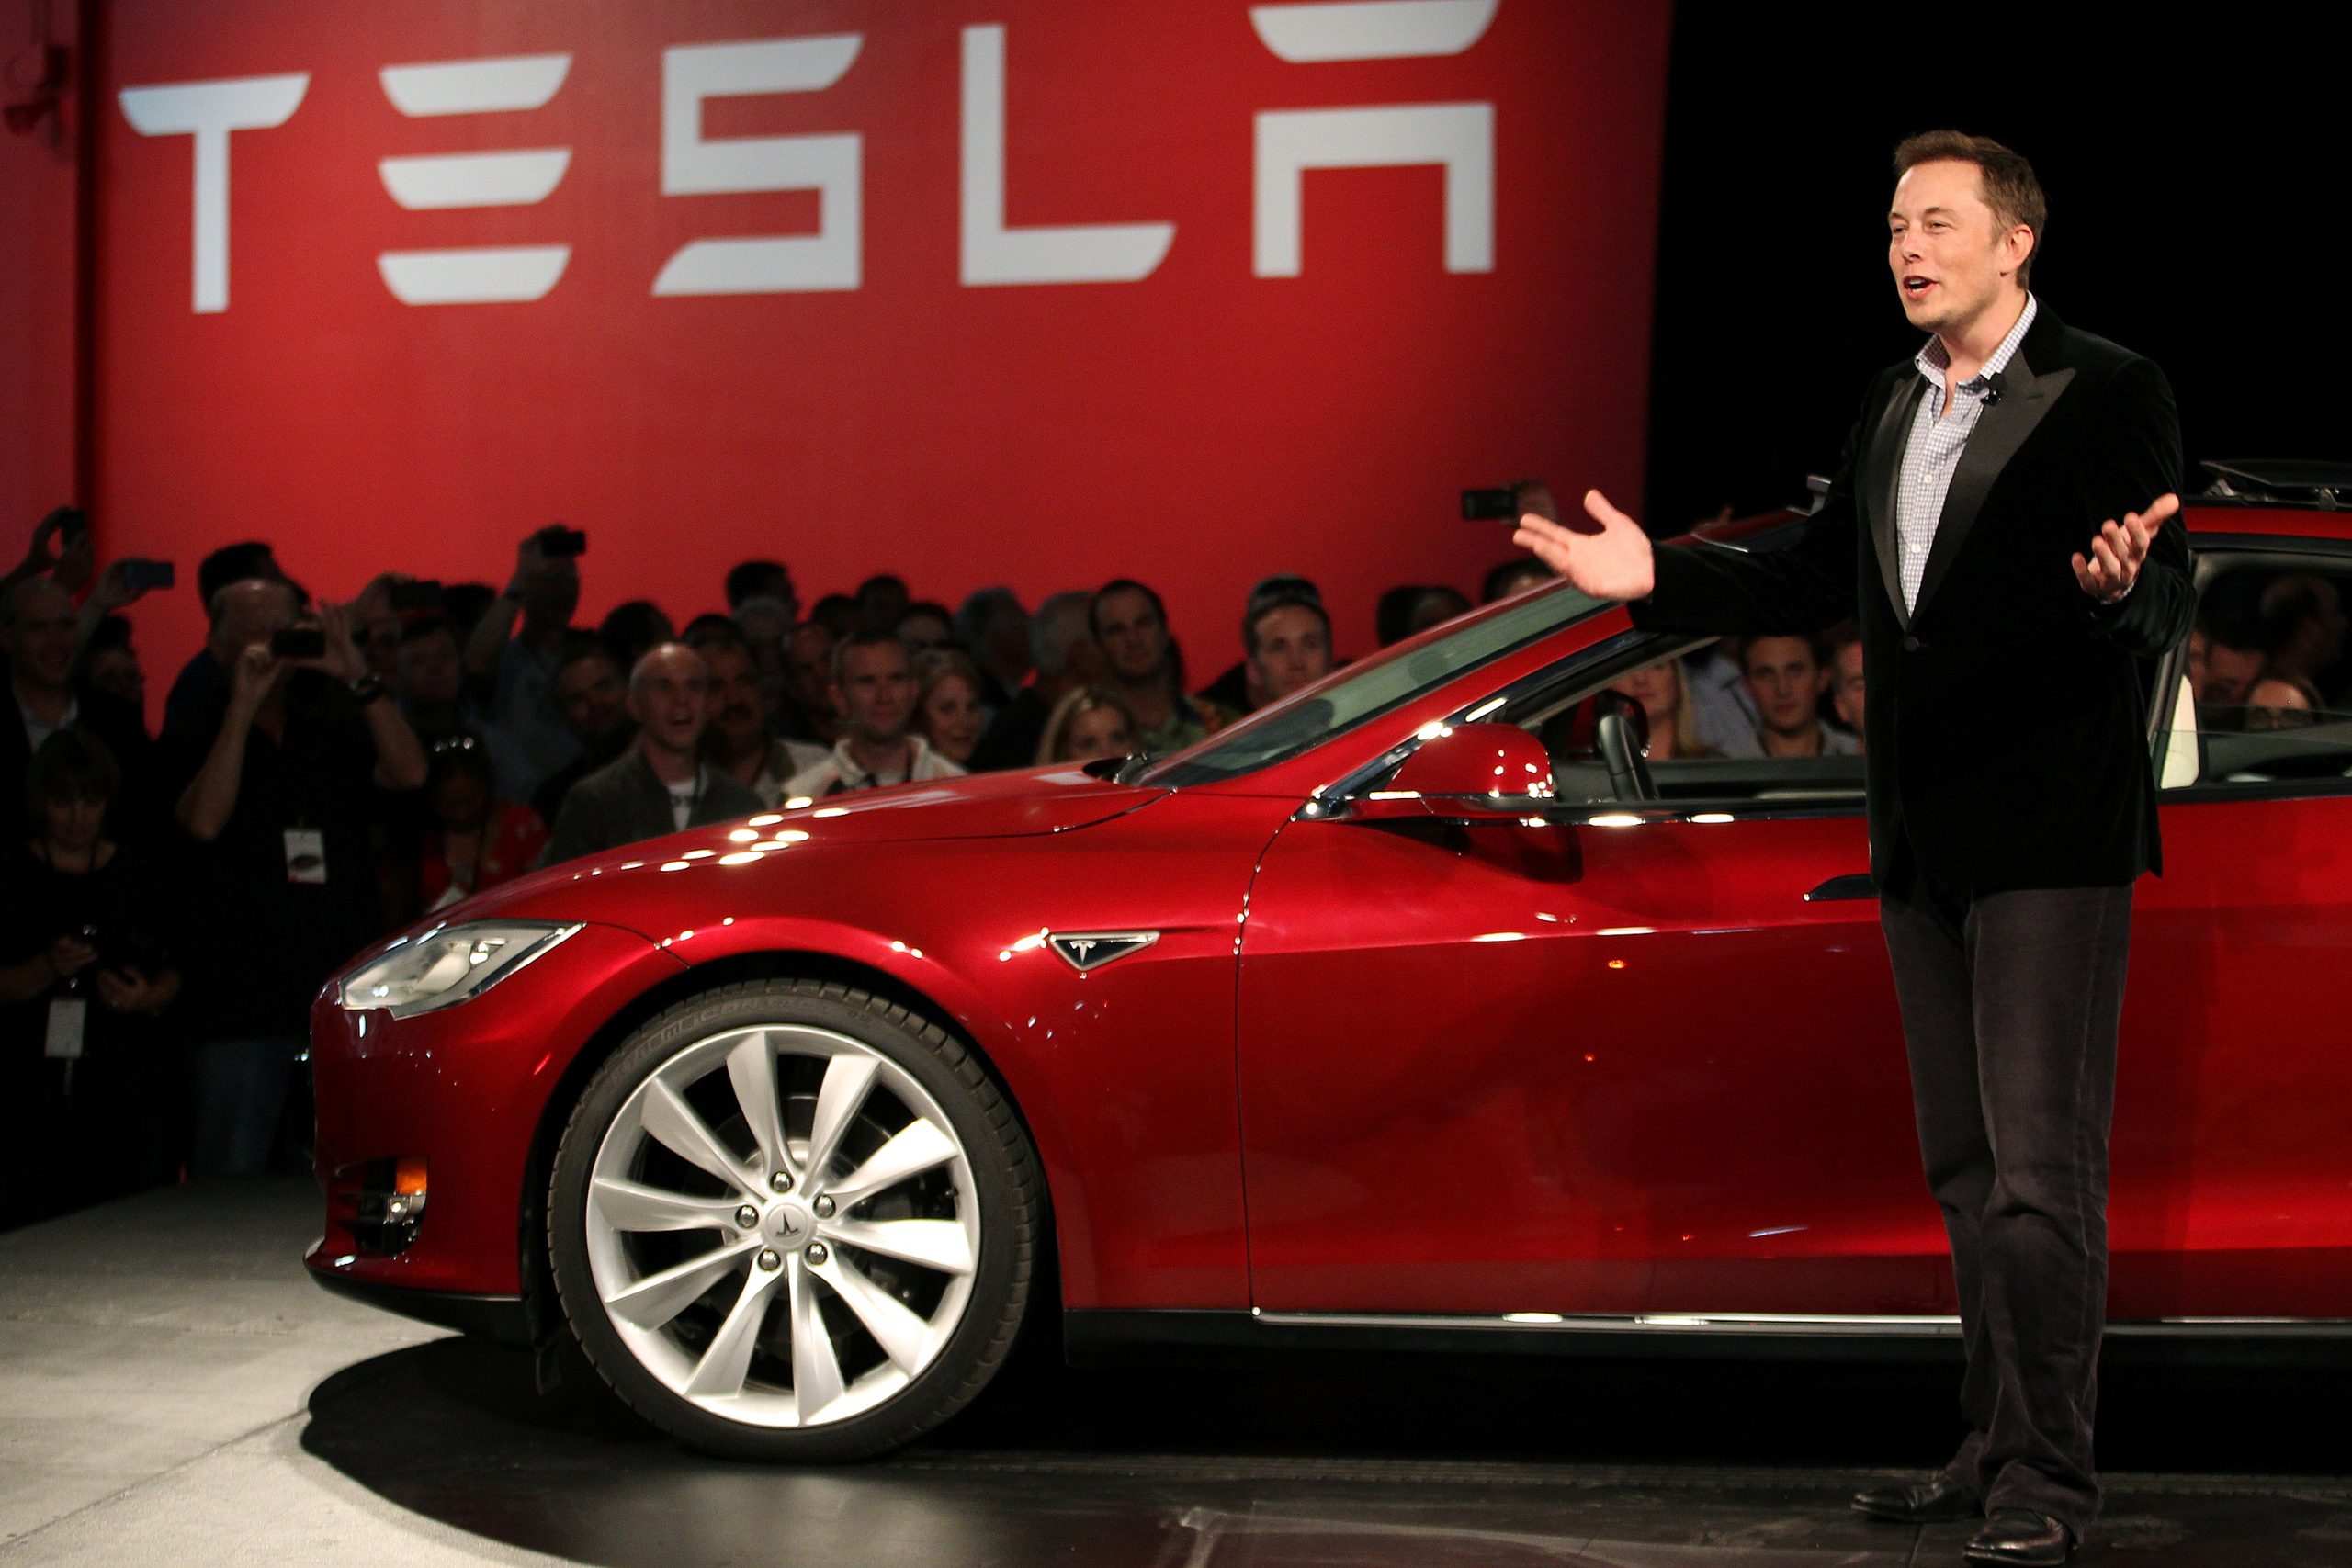 Musk is also expected to sell shares in Tesla